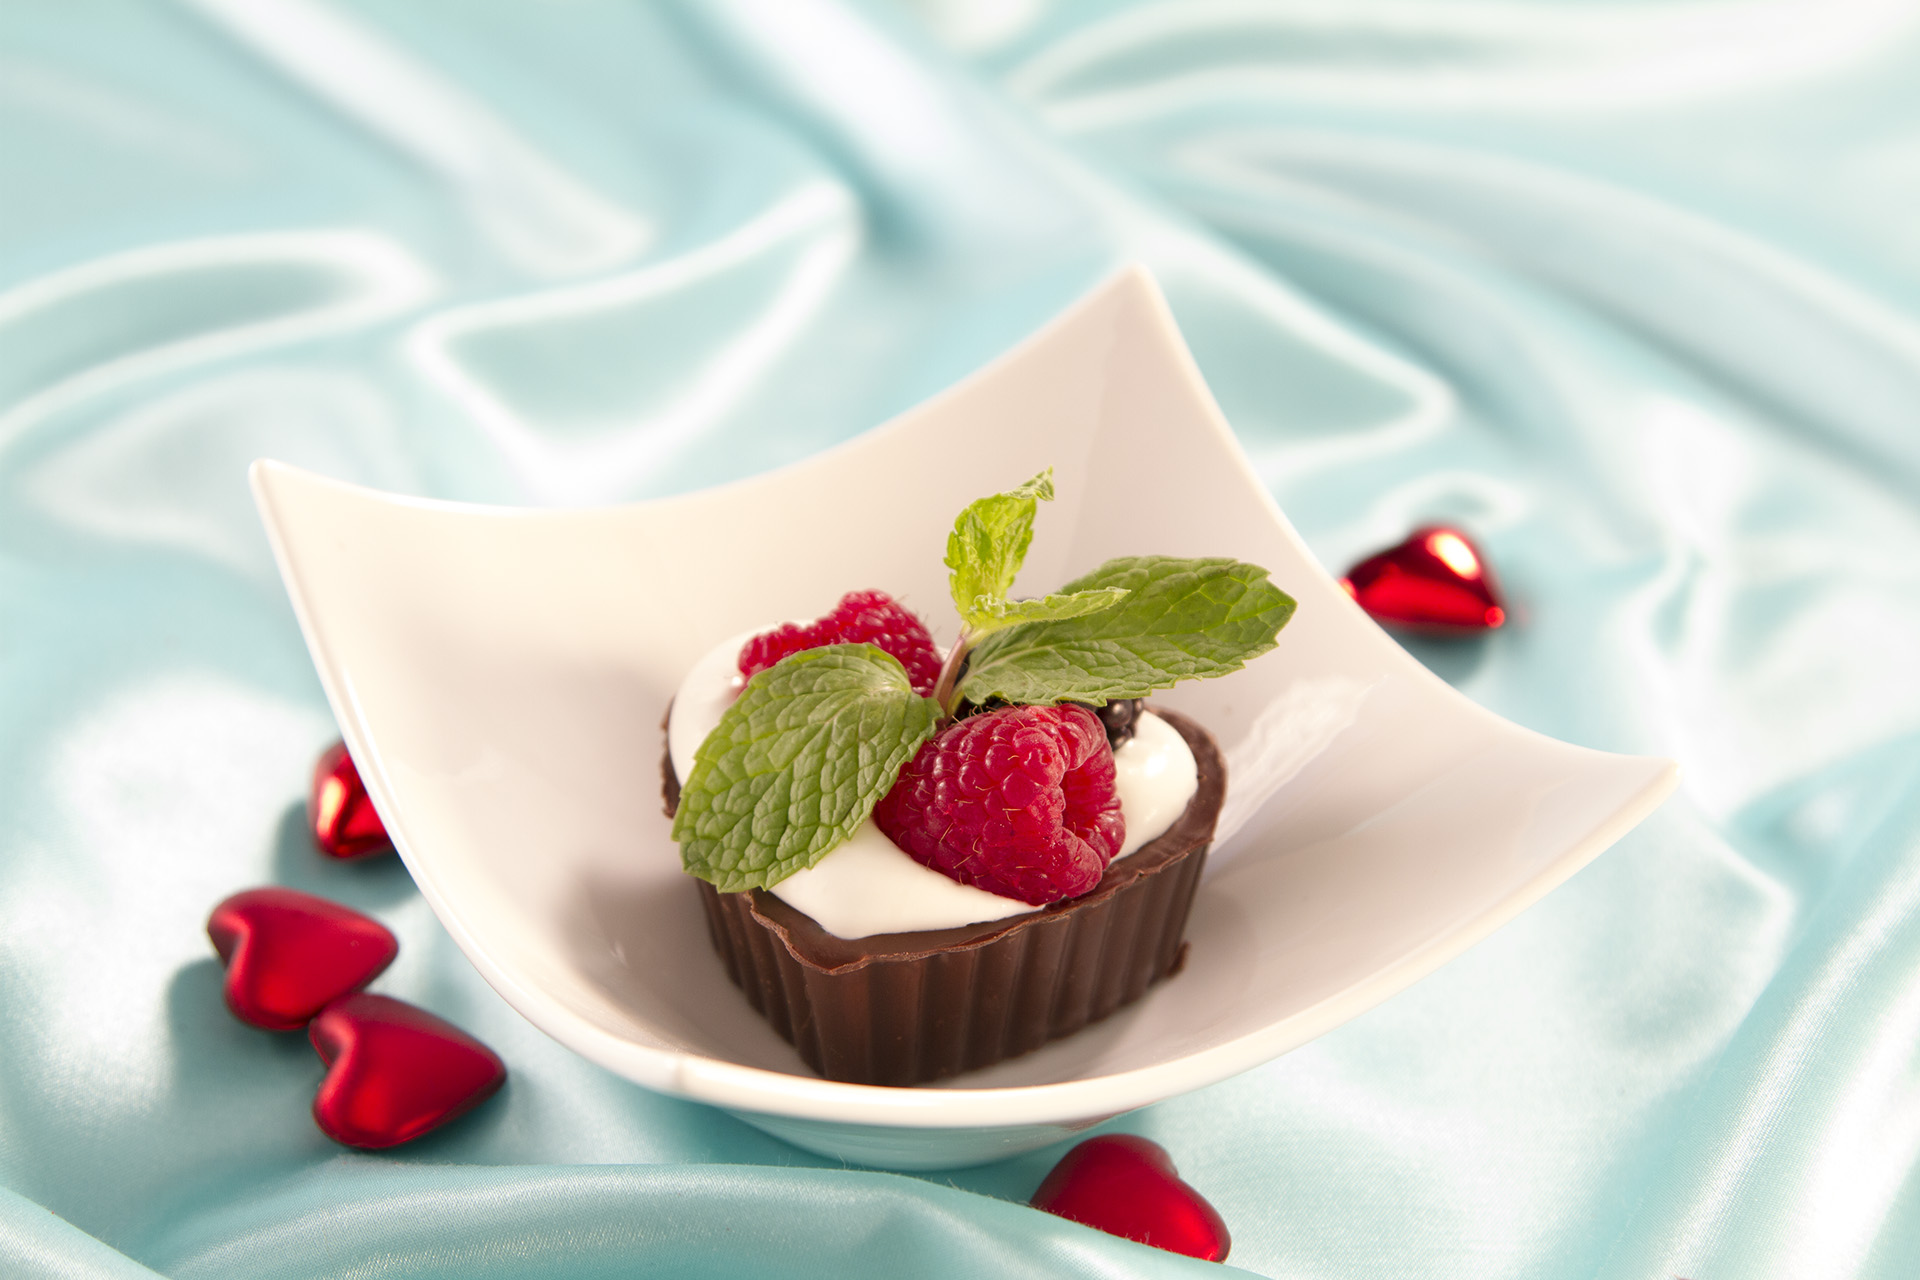 Chocolate Valentine Cups with Crème Fraiche are just the right touch for an elegant dessert at home.